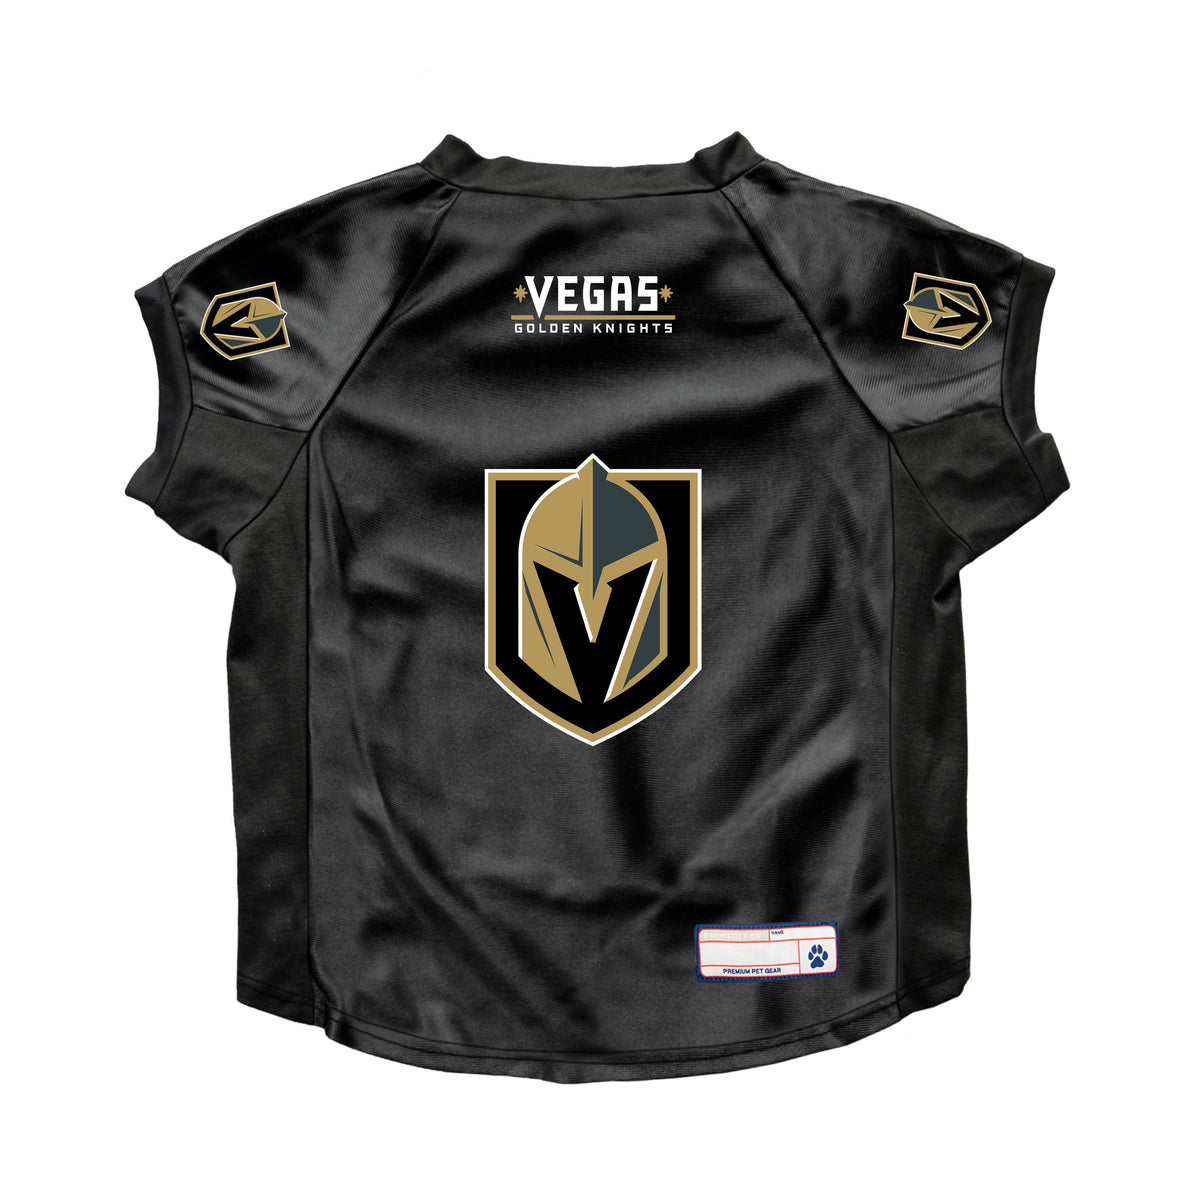 Vegas Golden Knights - The inside collar of our jersey will feature the  color red.